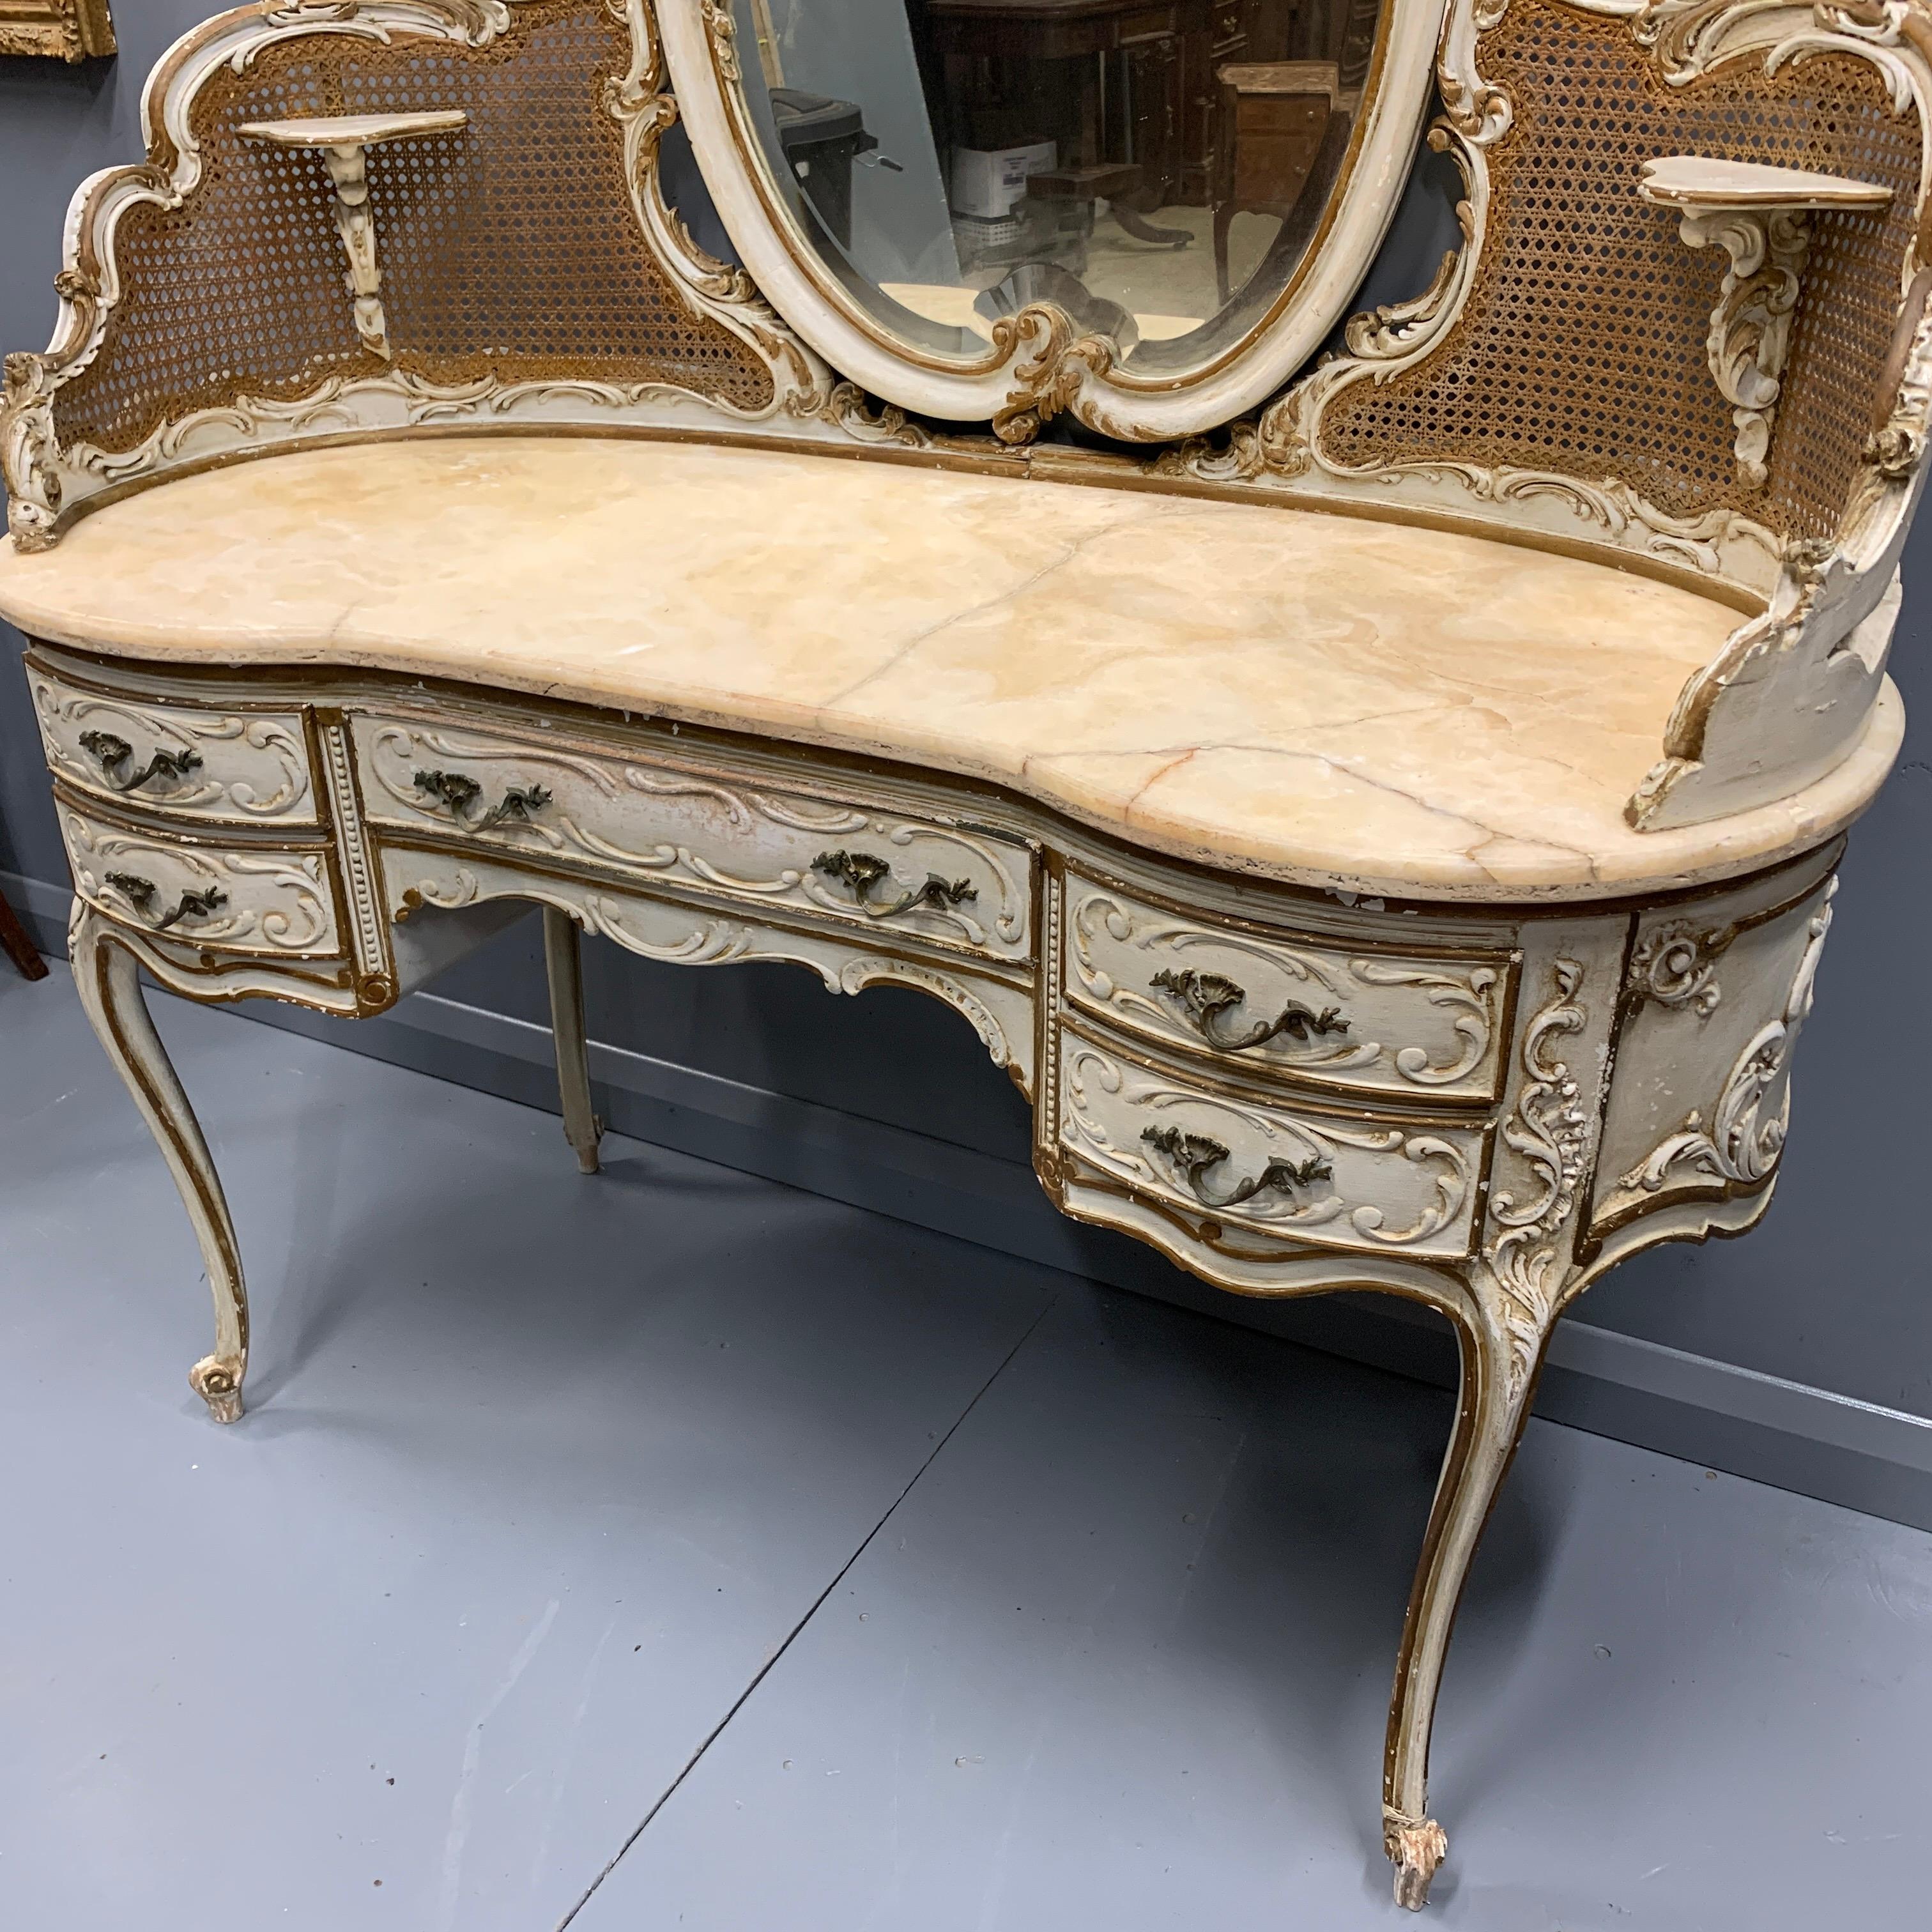 Rococo Revival Grand Scale Antique Italian Paint and Bronze Gilt Dressing Table with Marble Top For Sale